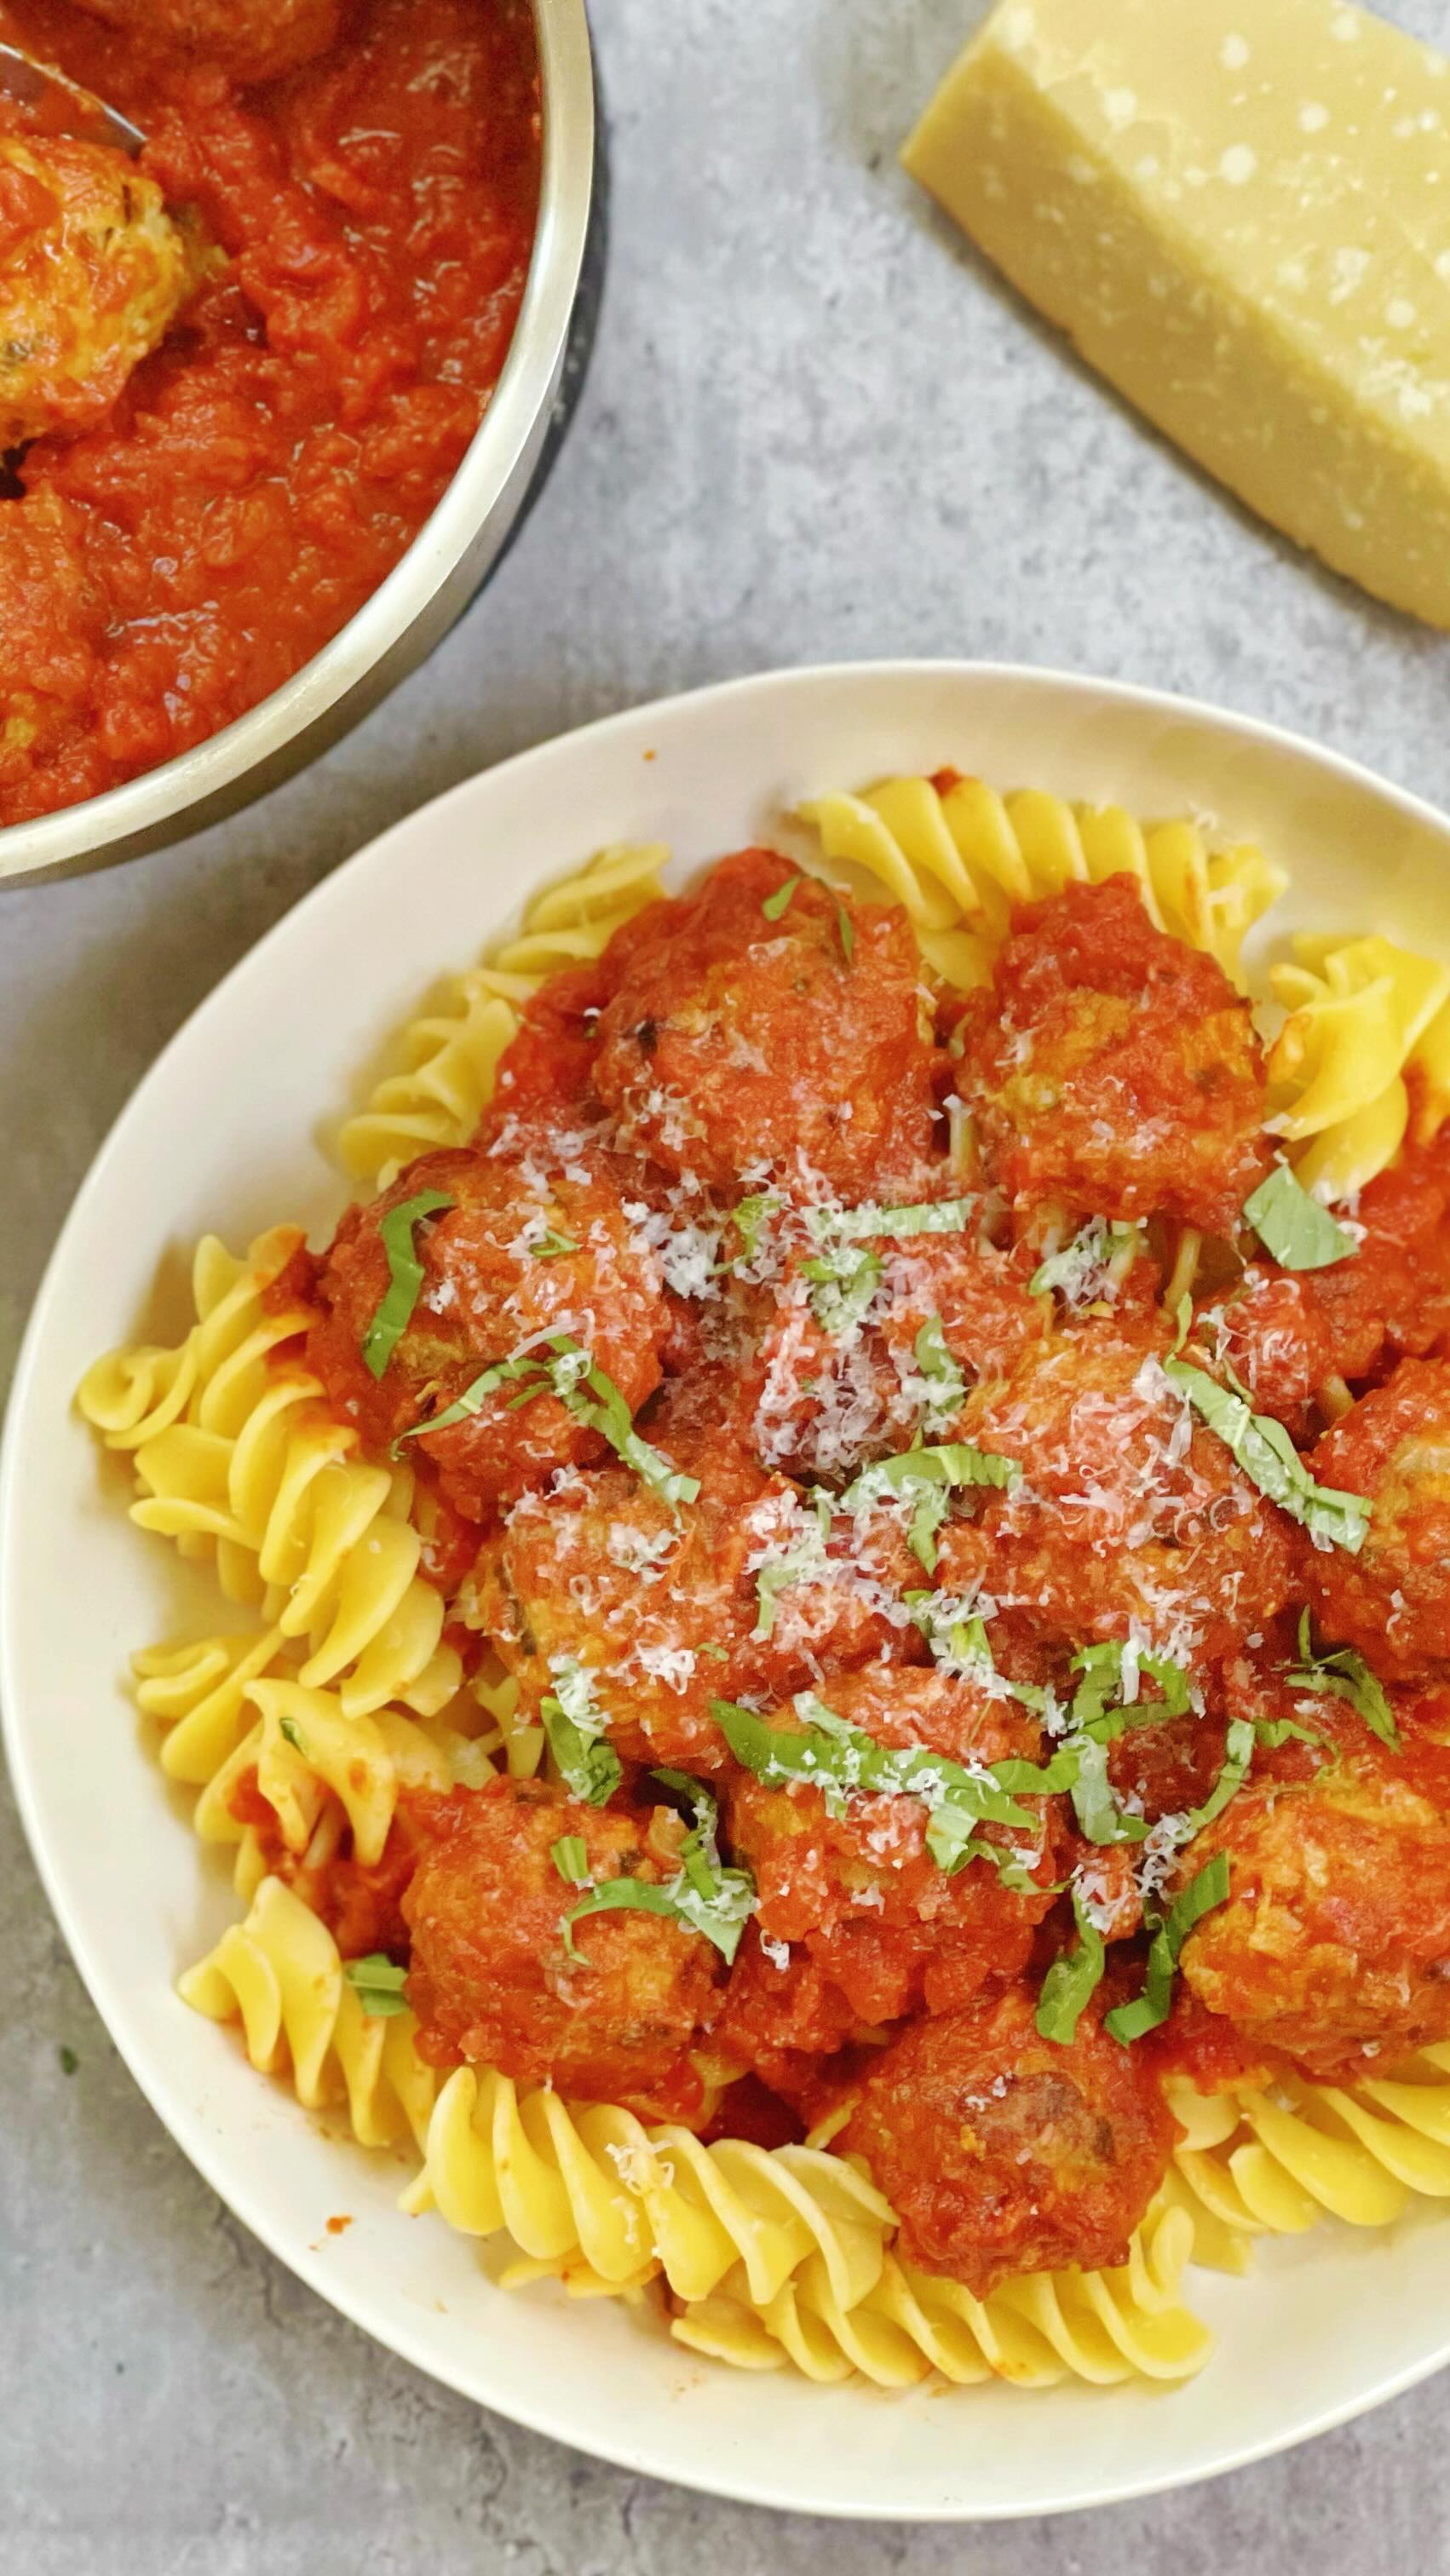 Follow @dinnerreinvented for more recipes like classic baked Turkey meatballs and spaghetti. This is my foolproof recipe, my kids ask for it all the time and my eldest says it’s his favorite of my recipes. I like to bake them so I can use them in different dishes throughout the week #meatballs #meatballrecipe #spaghettiandmeatballs #weeknightdinner #easydinner #leftovers #whattodowithleftoverturkey #whattodowithleftovers #dinnerreinvented #roniproter #foodblogger #feedfeed #foodstagram #healthydinner #quickmeals